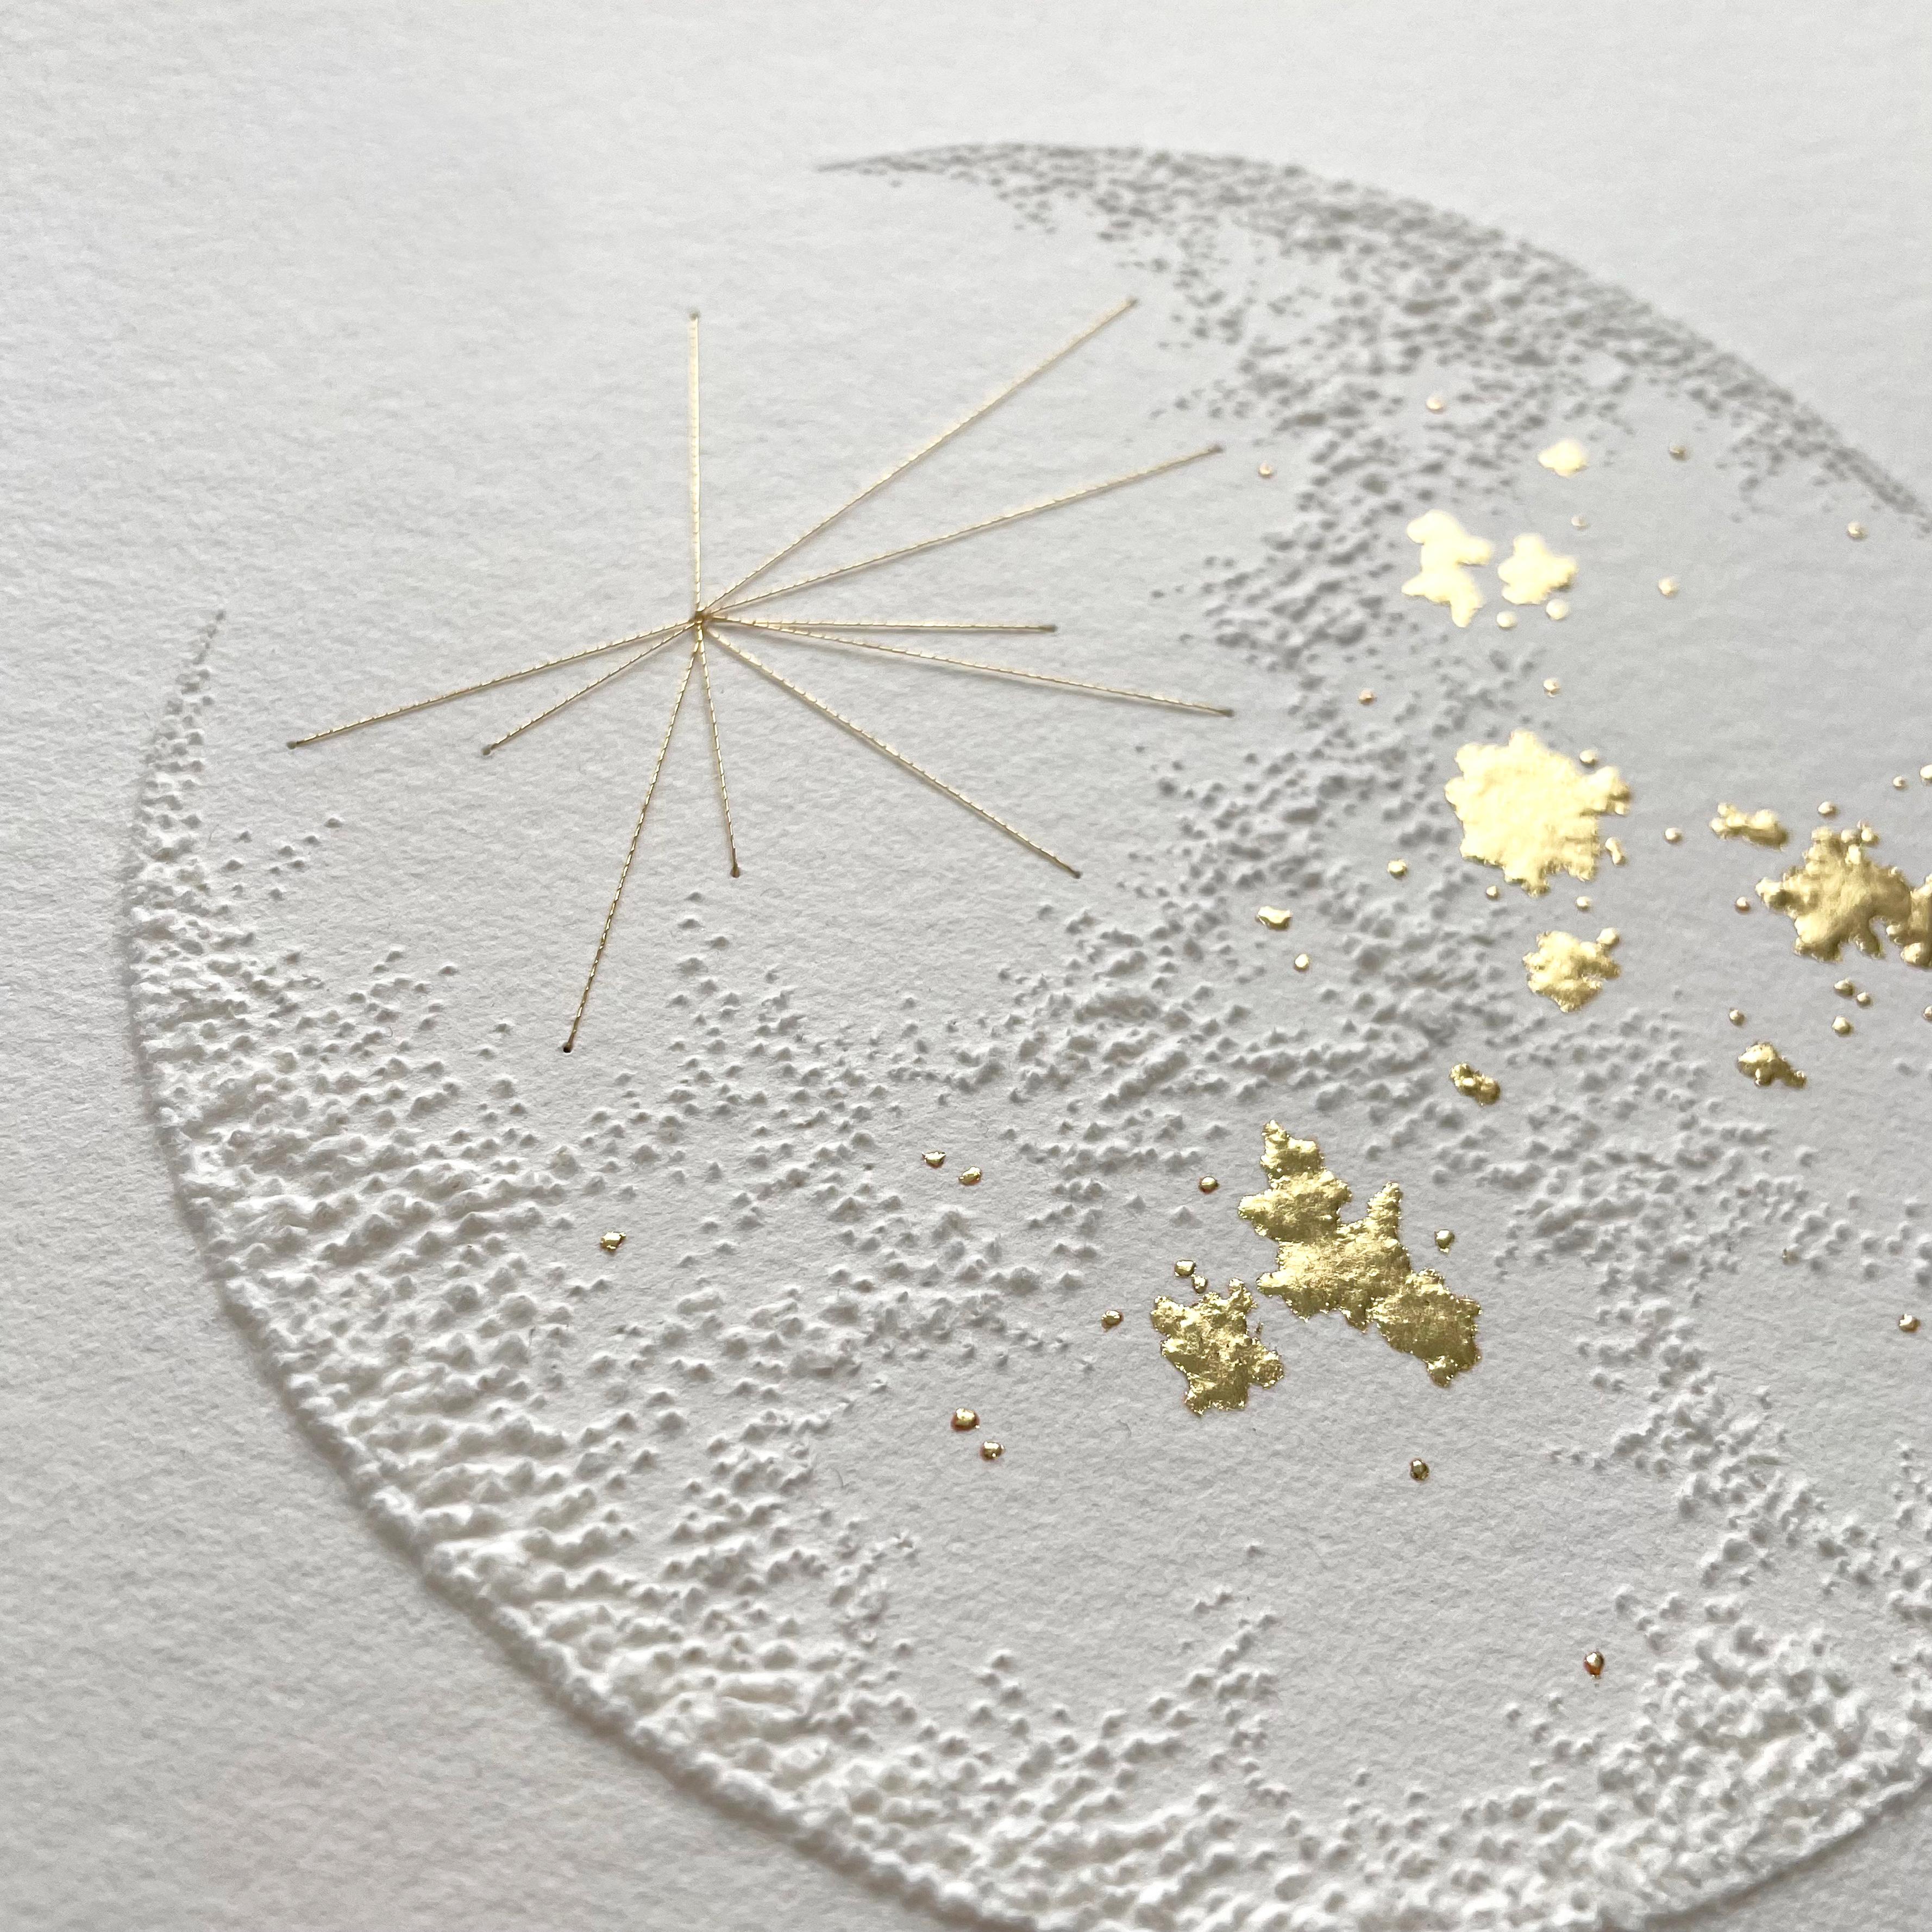 Moon 3- white 3D abstract circle with gold leaves. thread and pulled paper fiber - Sculpture by Antonin Anzil